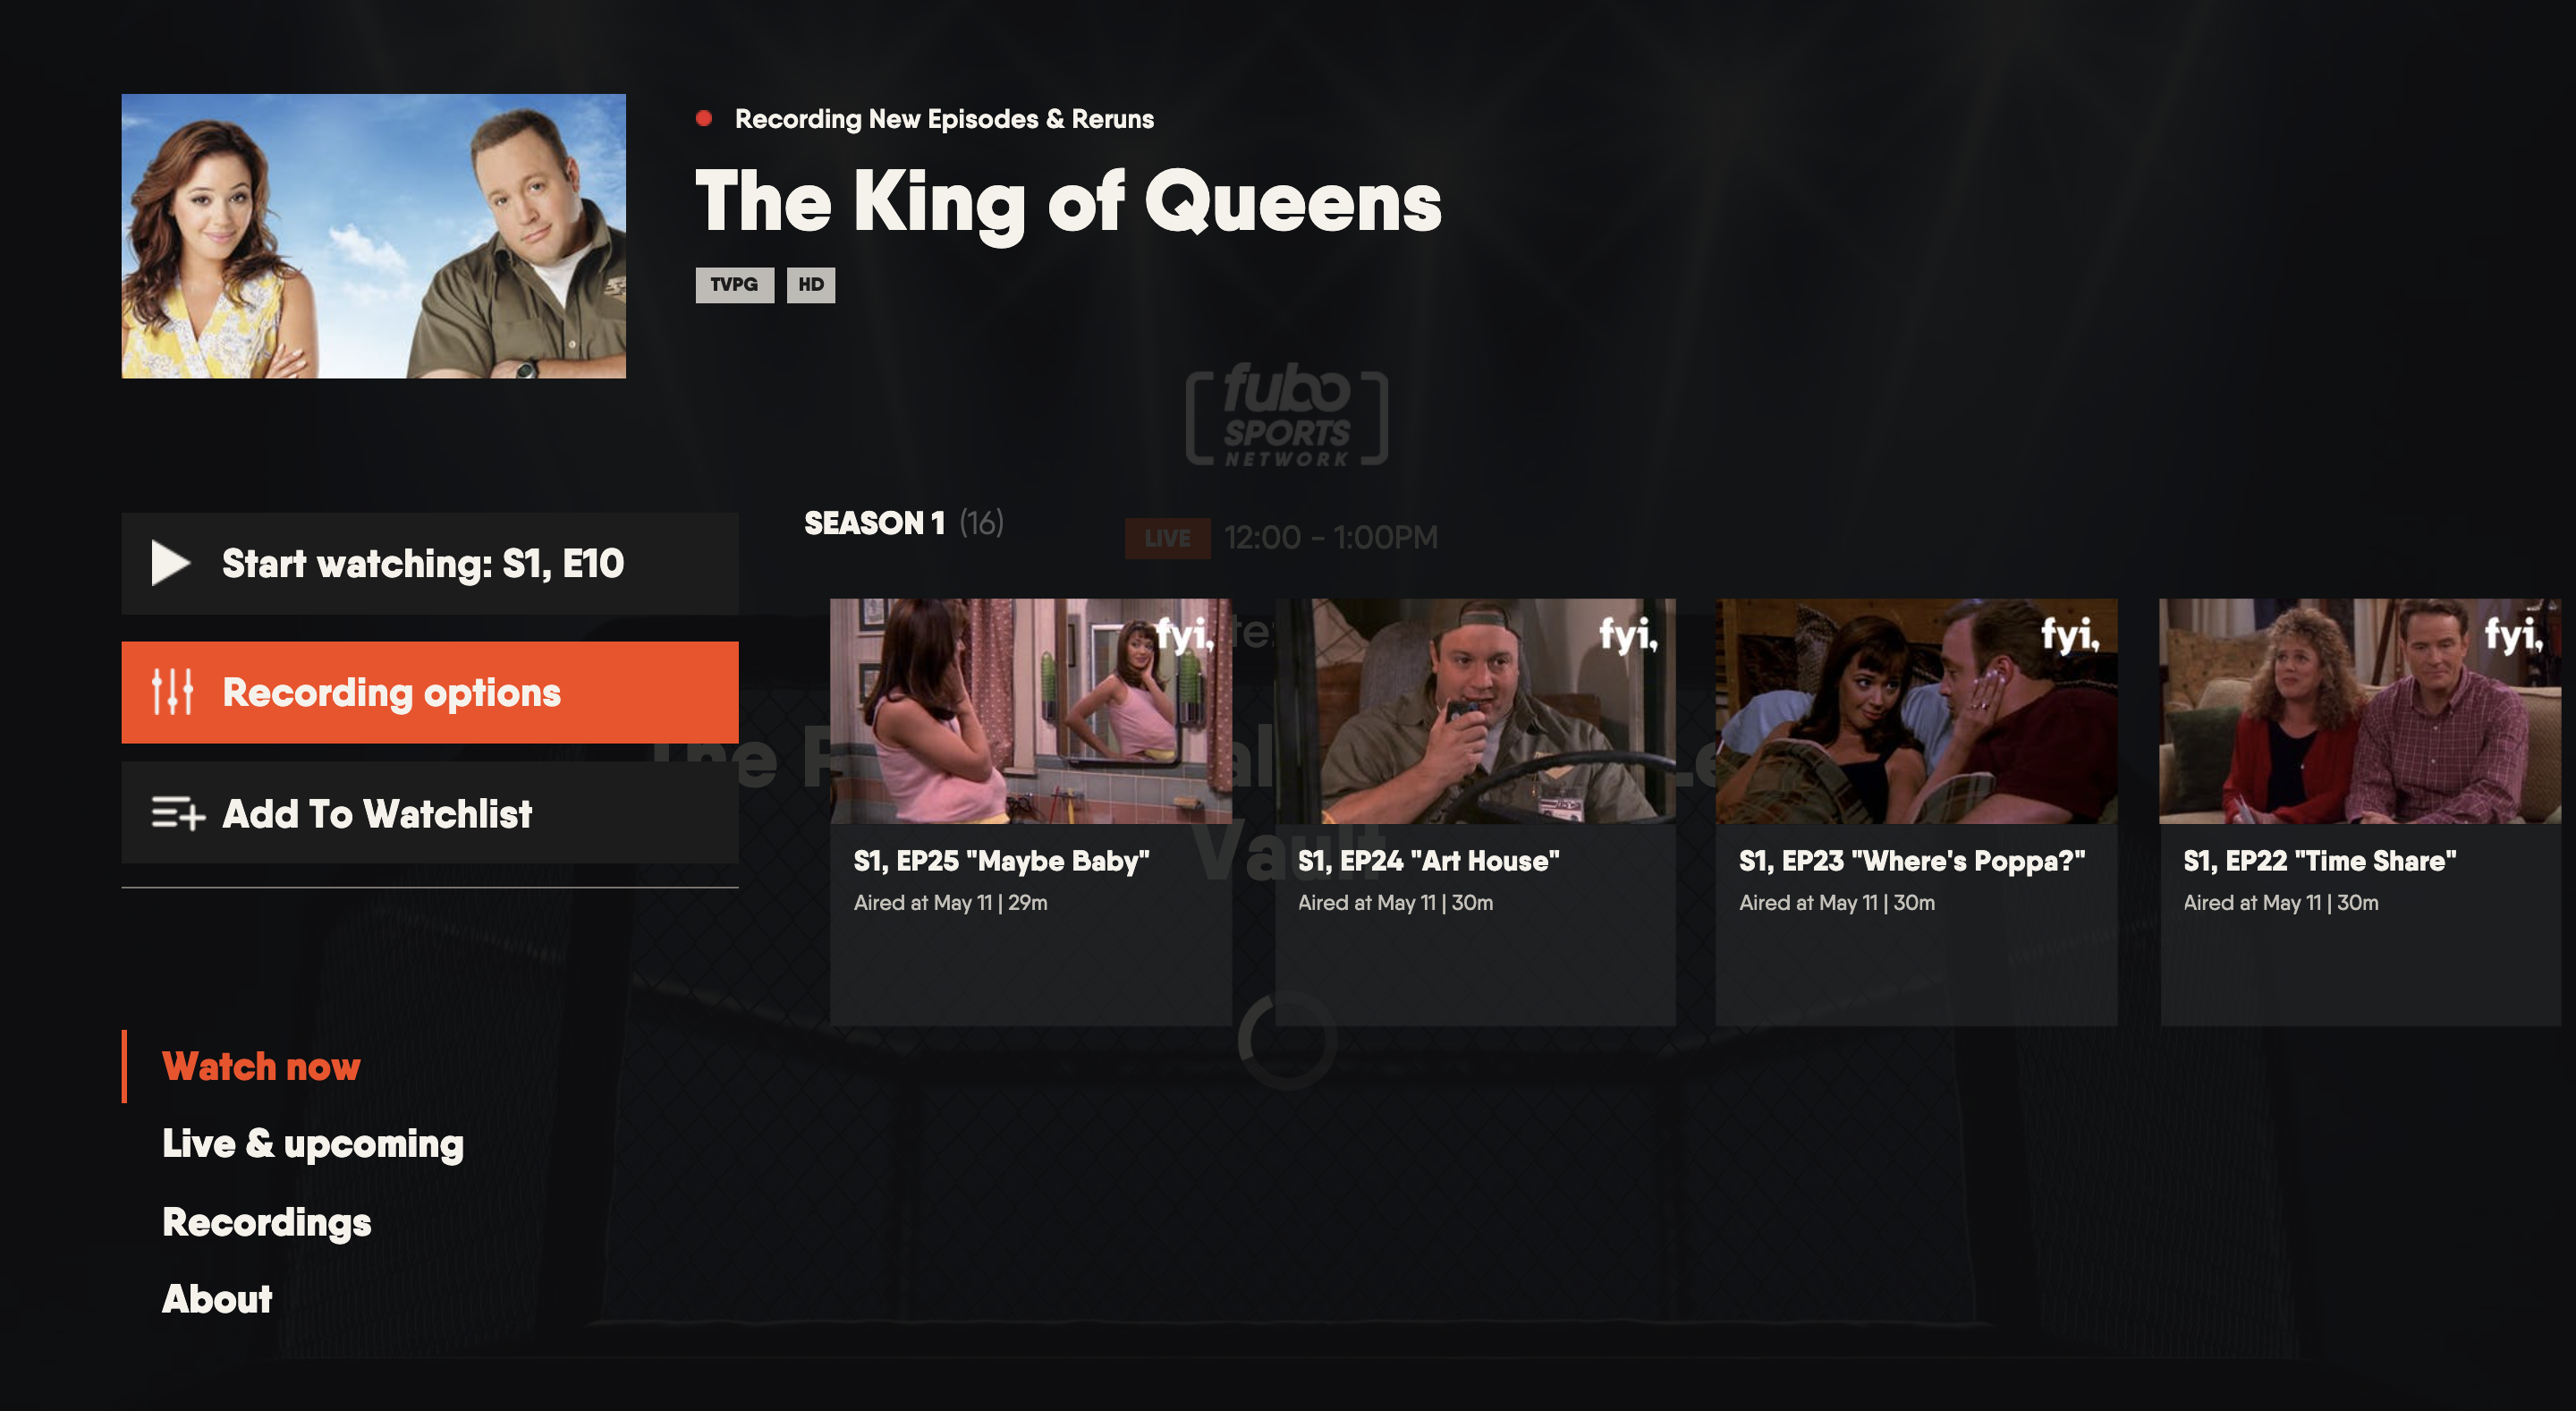 Series details page of the FuboTV app on Vizio TV with RECORDING OPTIONS highlighted along the left of the screen